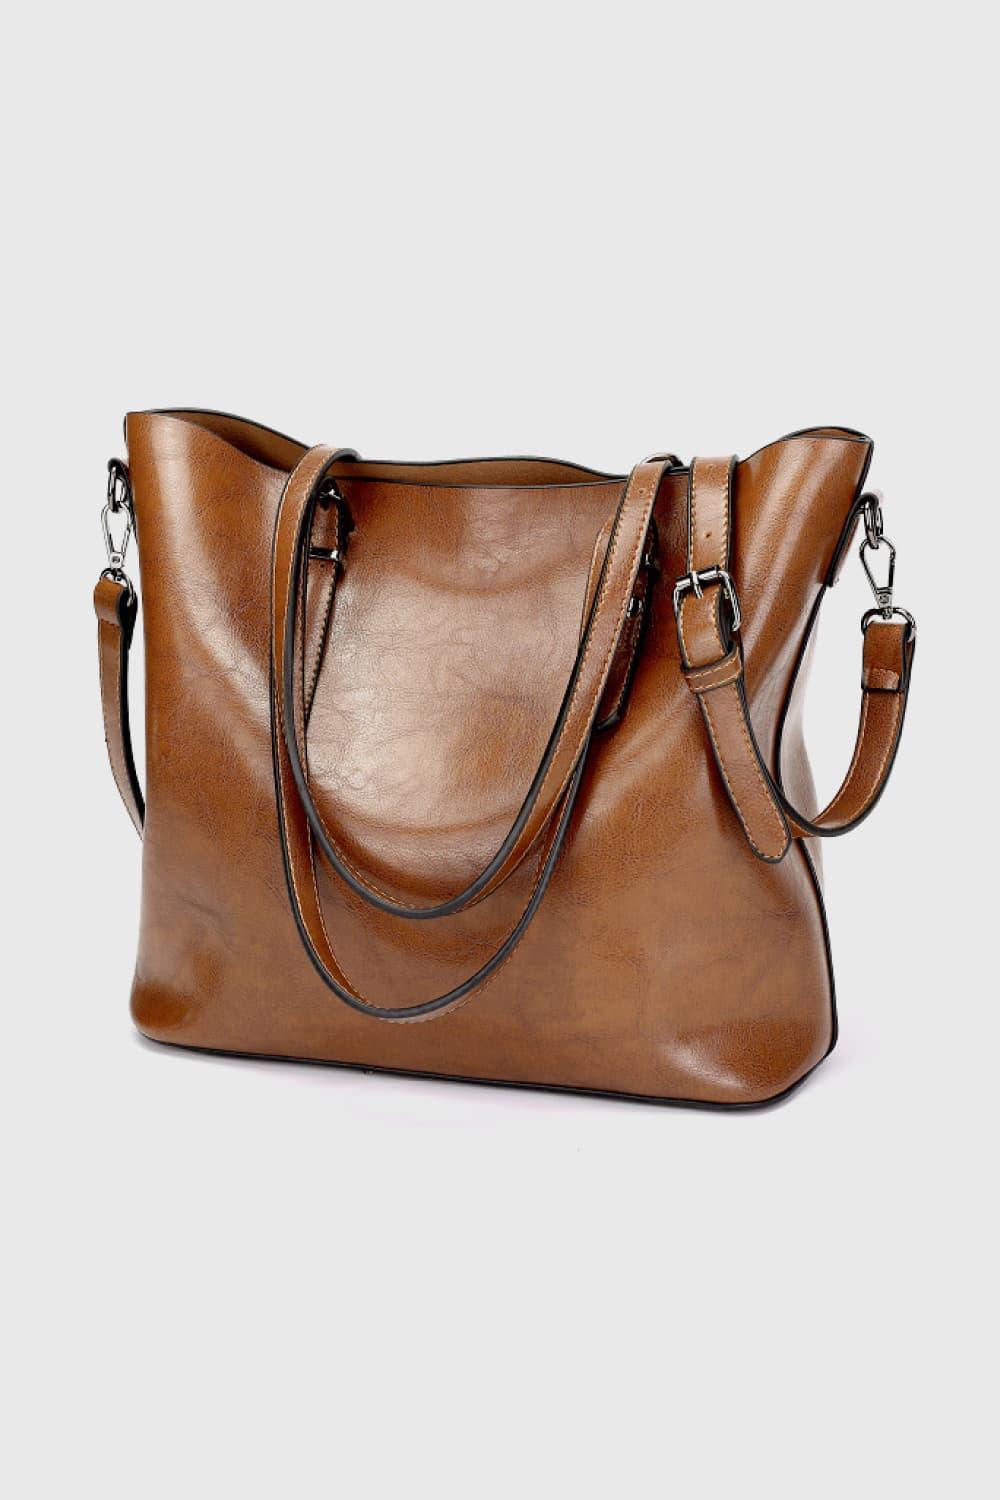 Luxe Carry All Large Leather Tote Bag - MXSTUDIO.COM